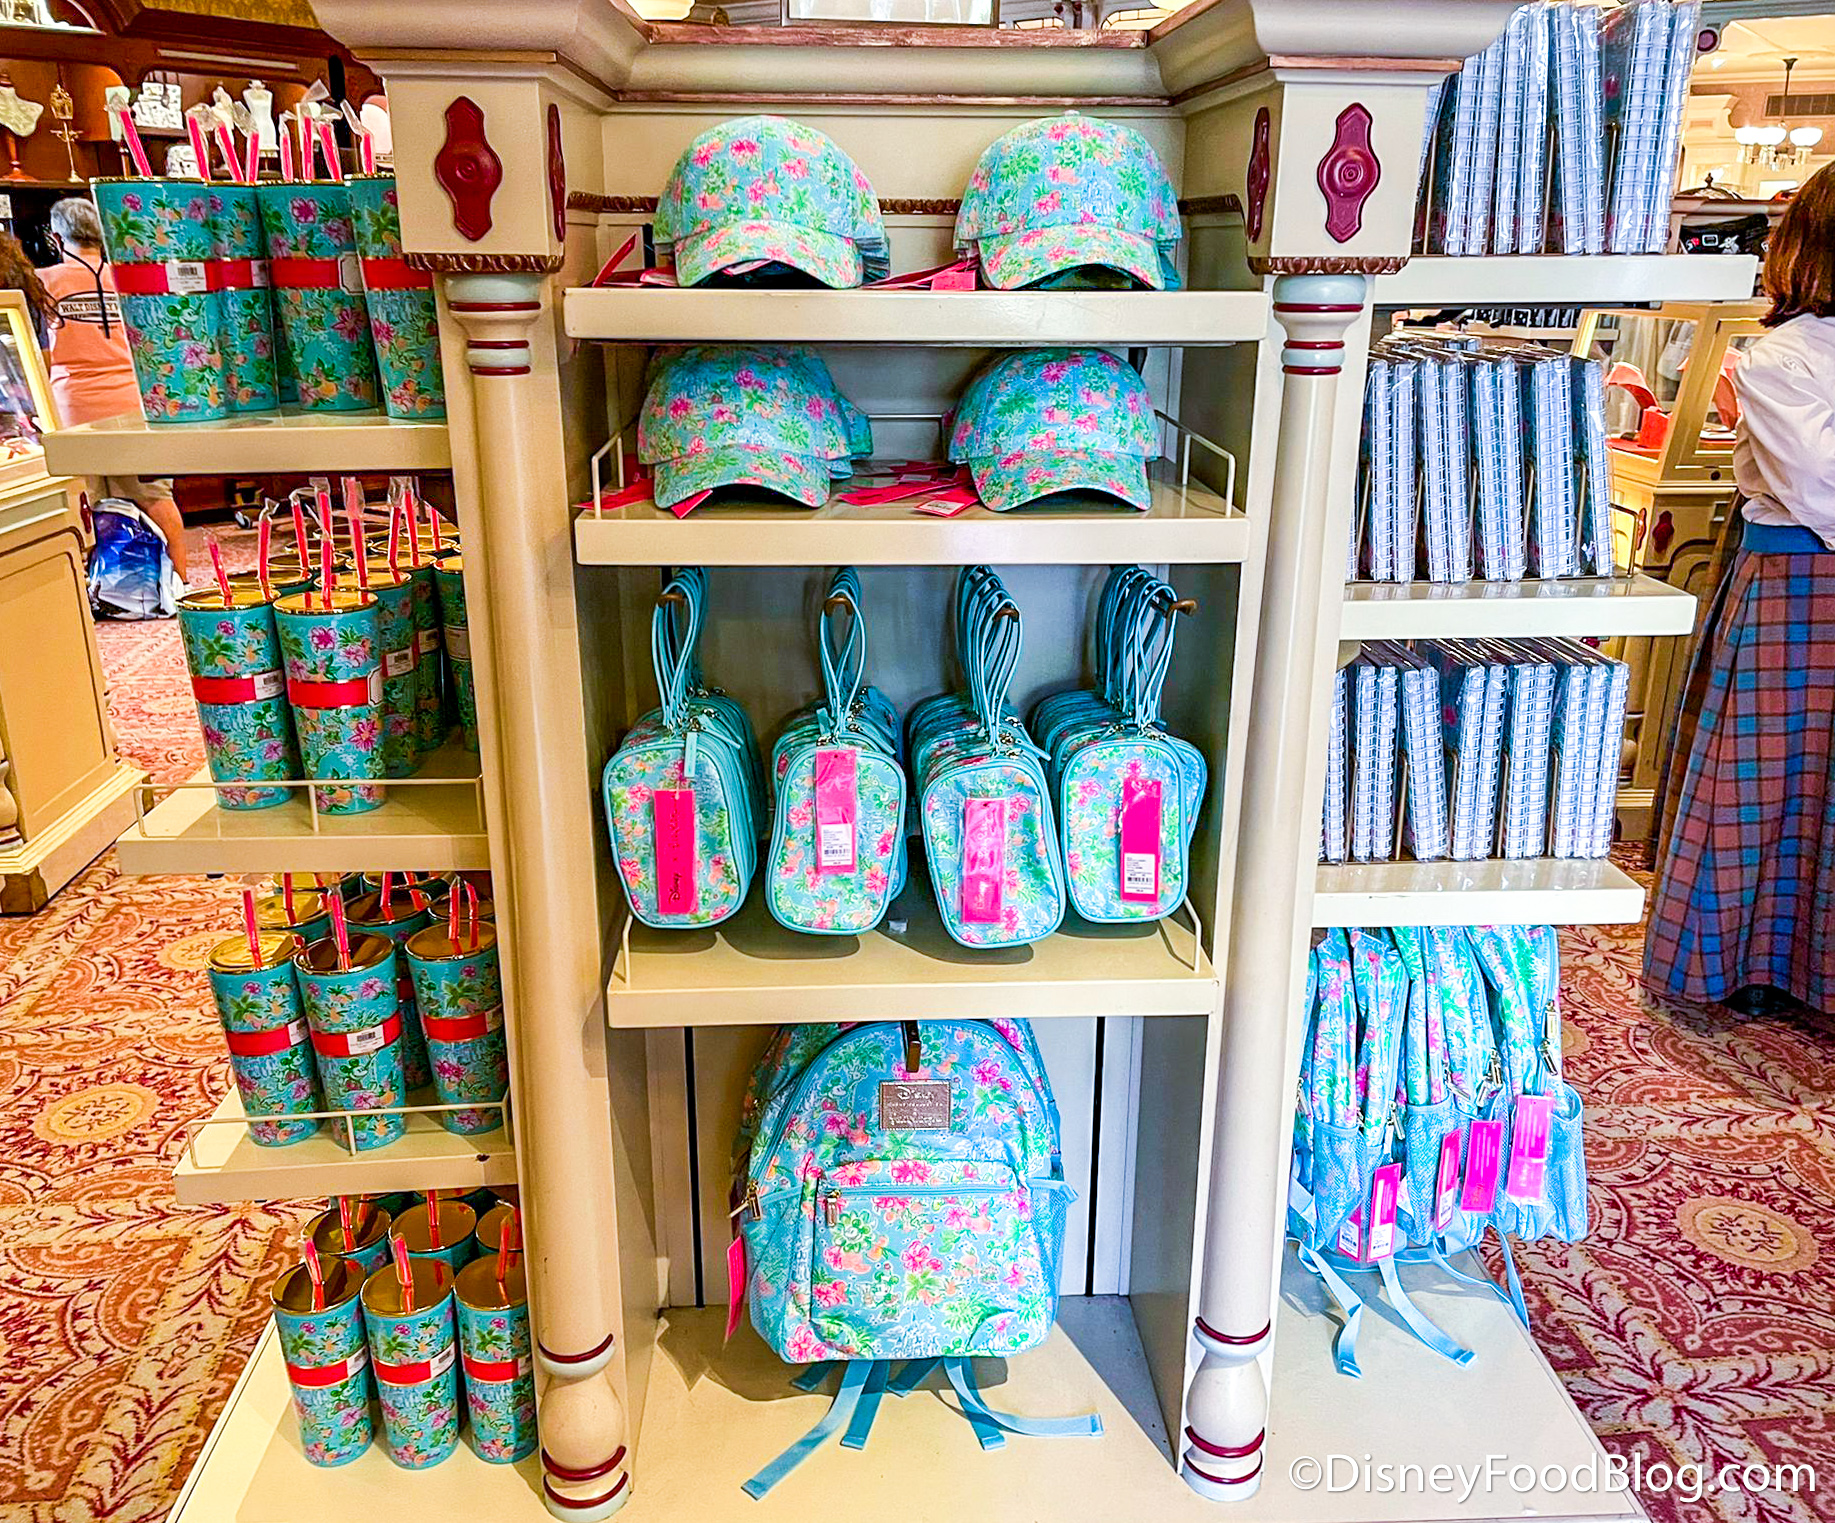 HURRY! The Sold Out Lilly Pulitzer Collection is Now in Disney